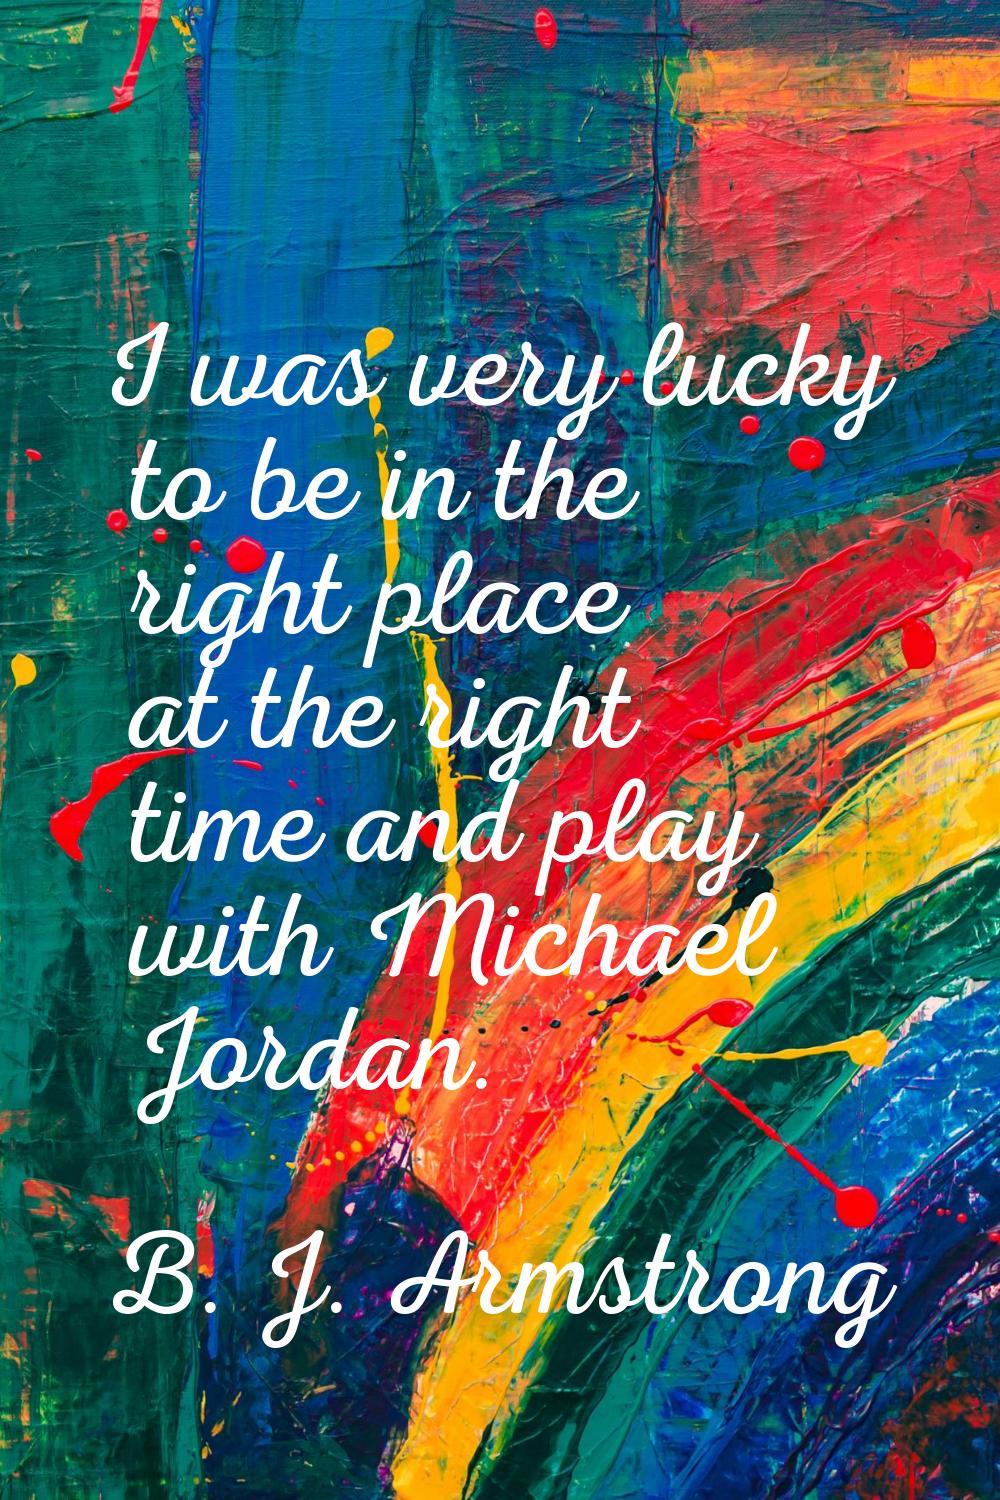 I was very lucky to be in the right place at the right time and play with Michael Jordan.